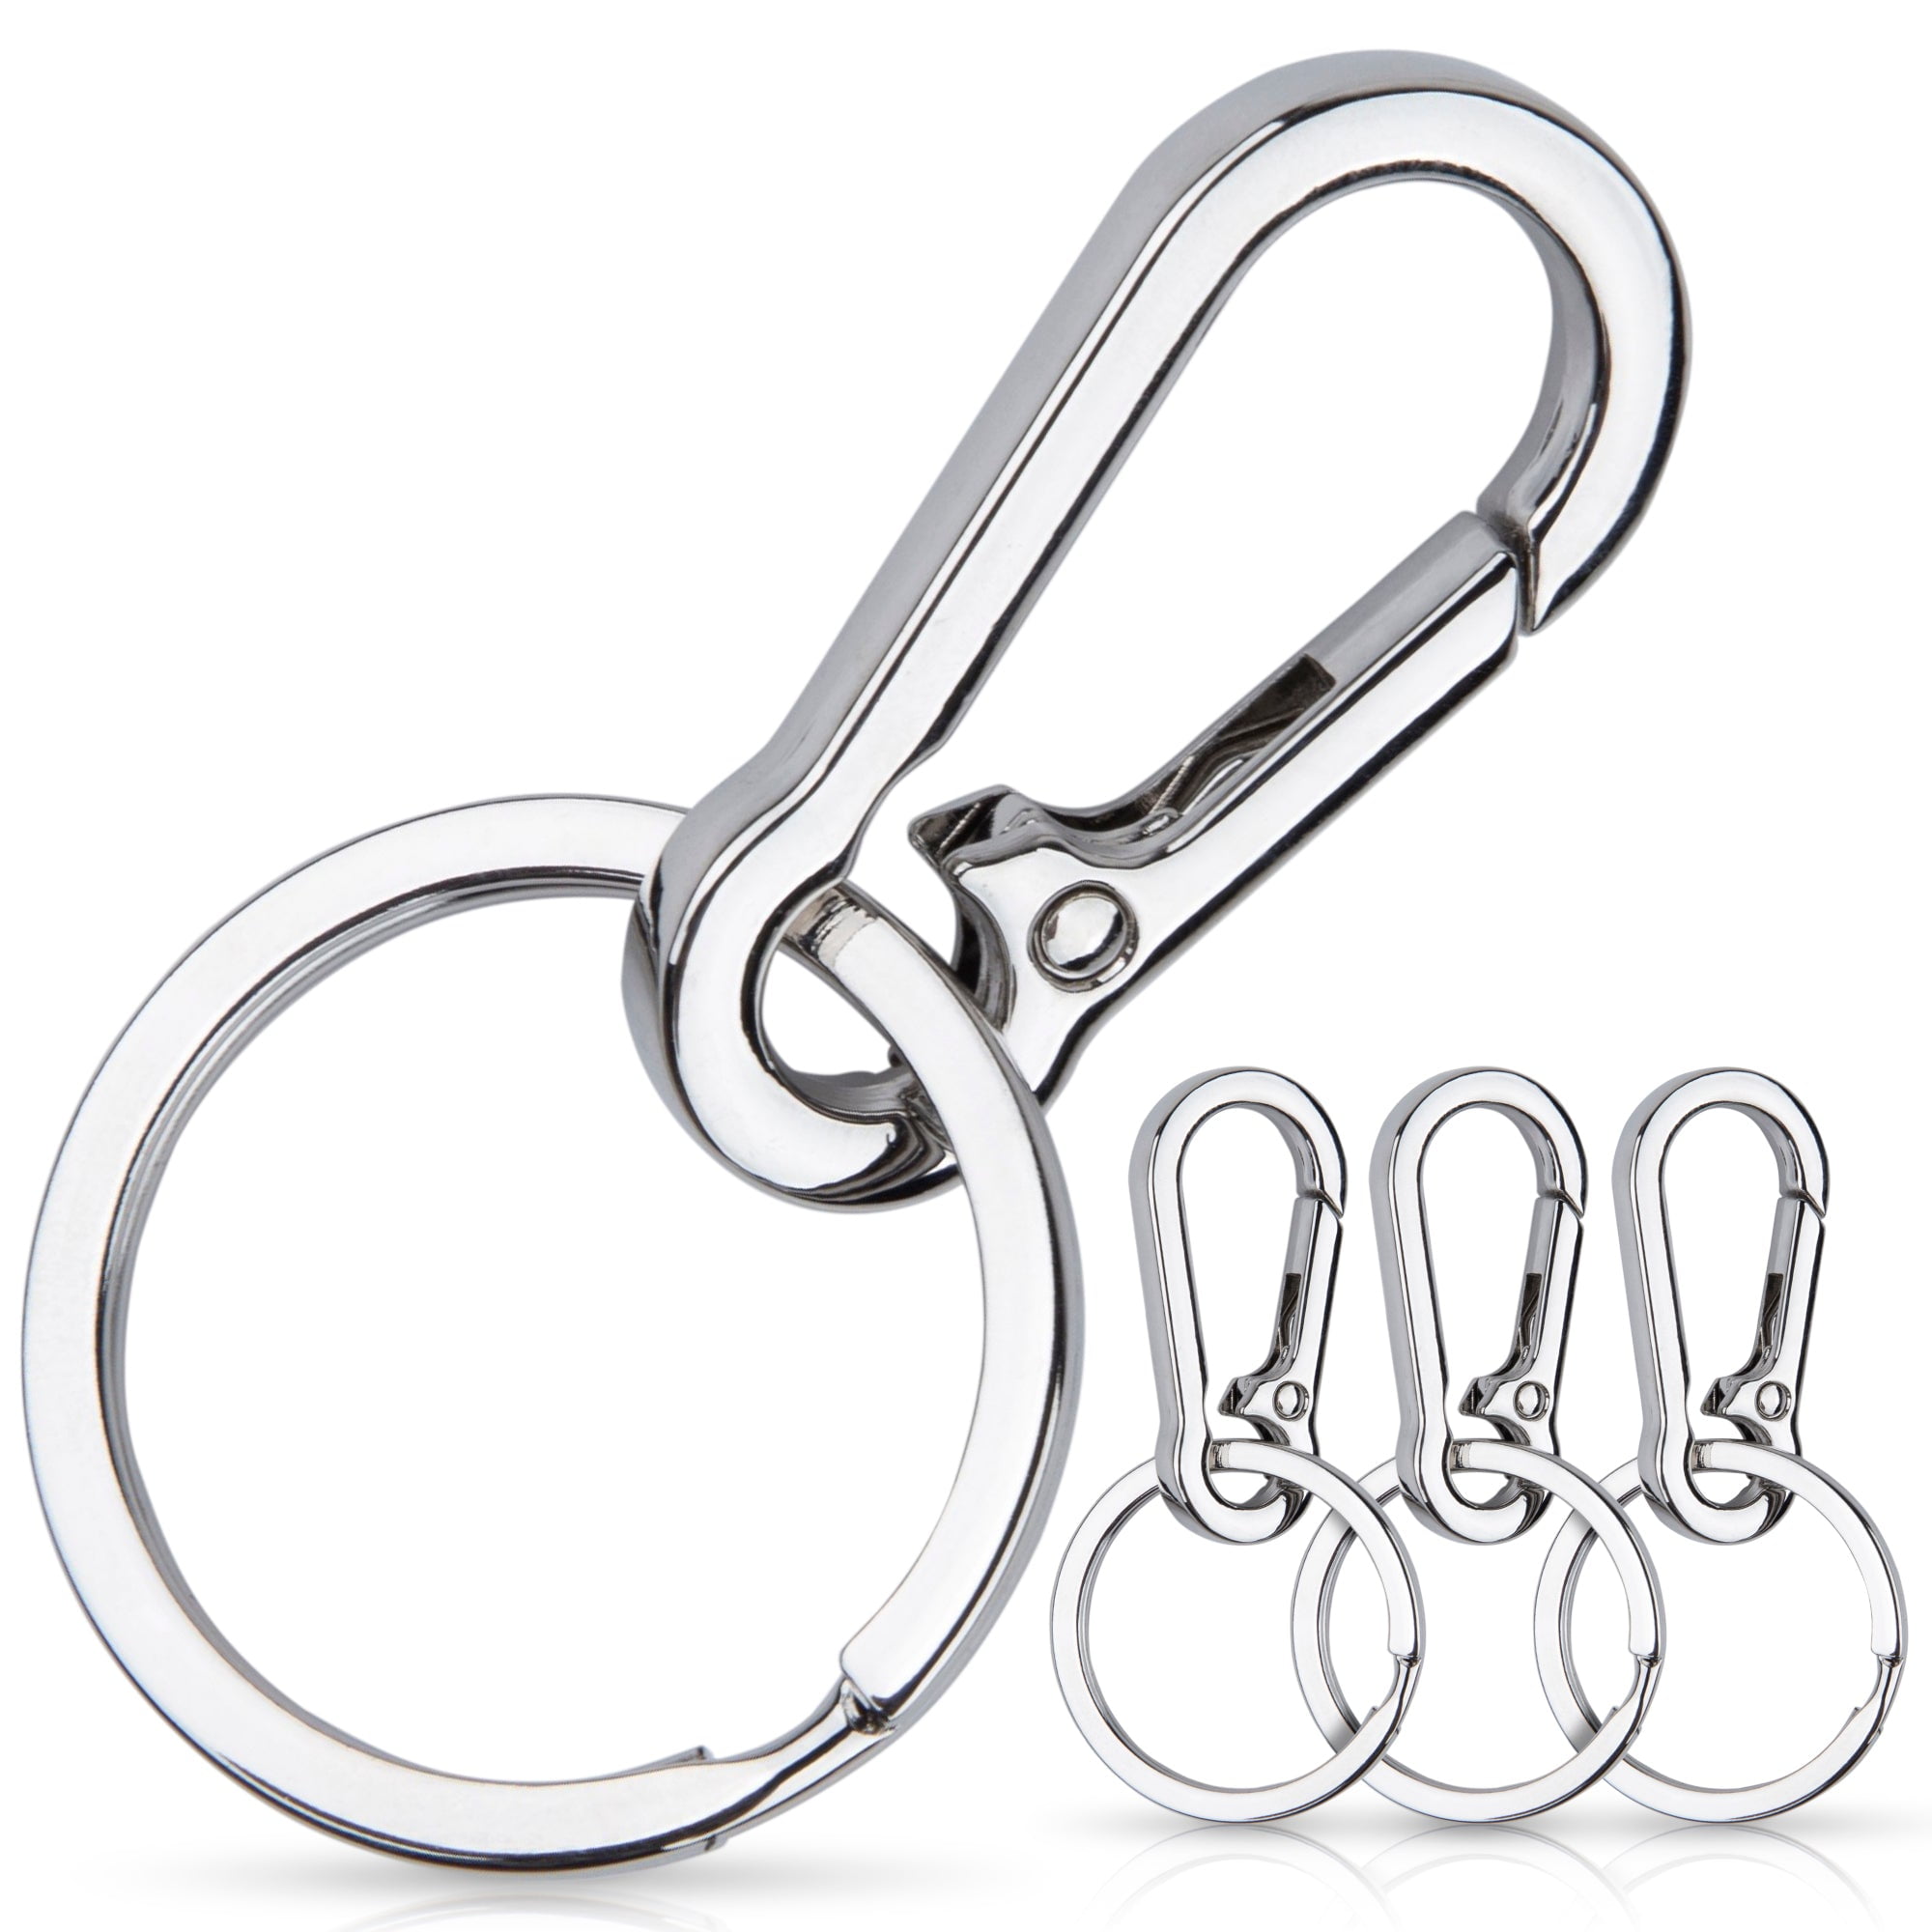 4 Piece Key Rings with small Carabiners - Walmart.com